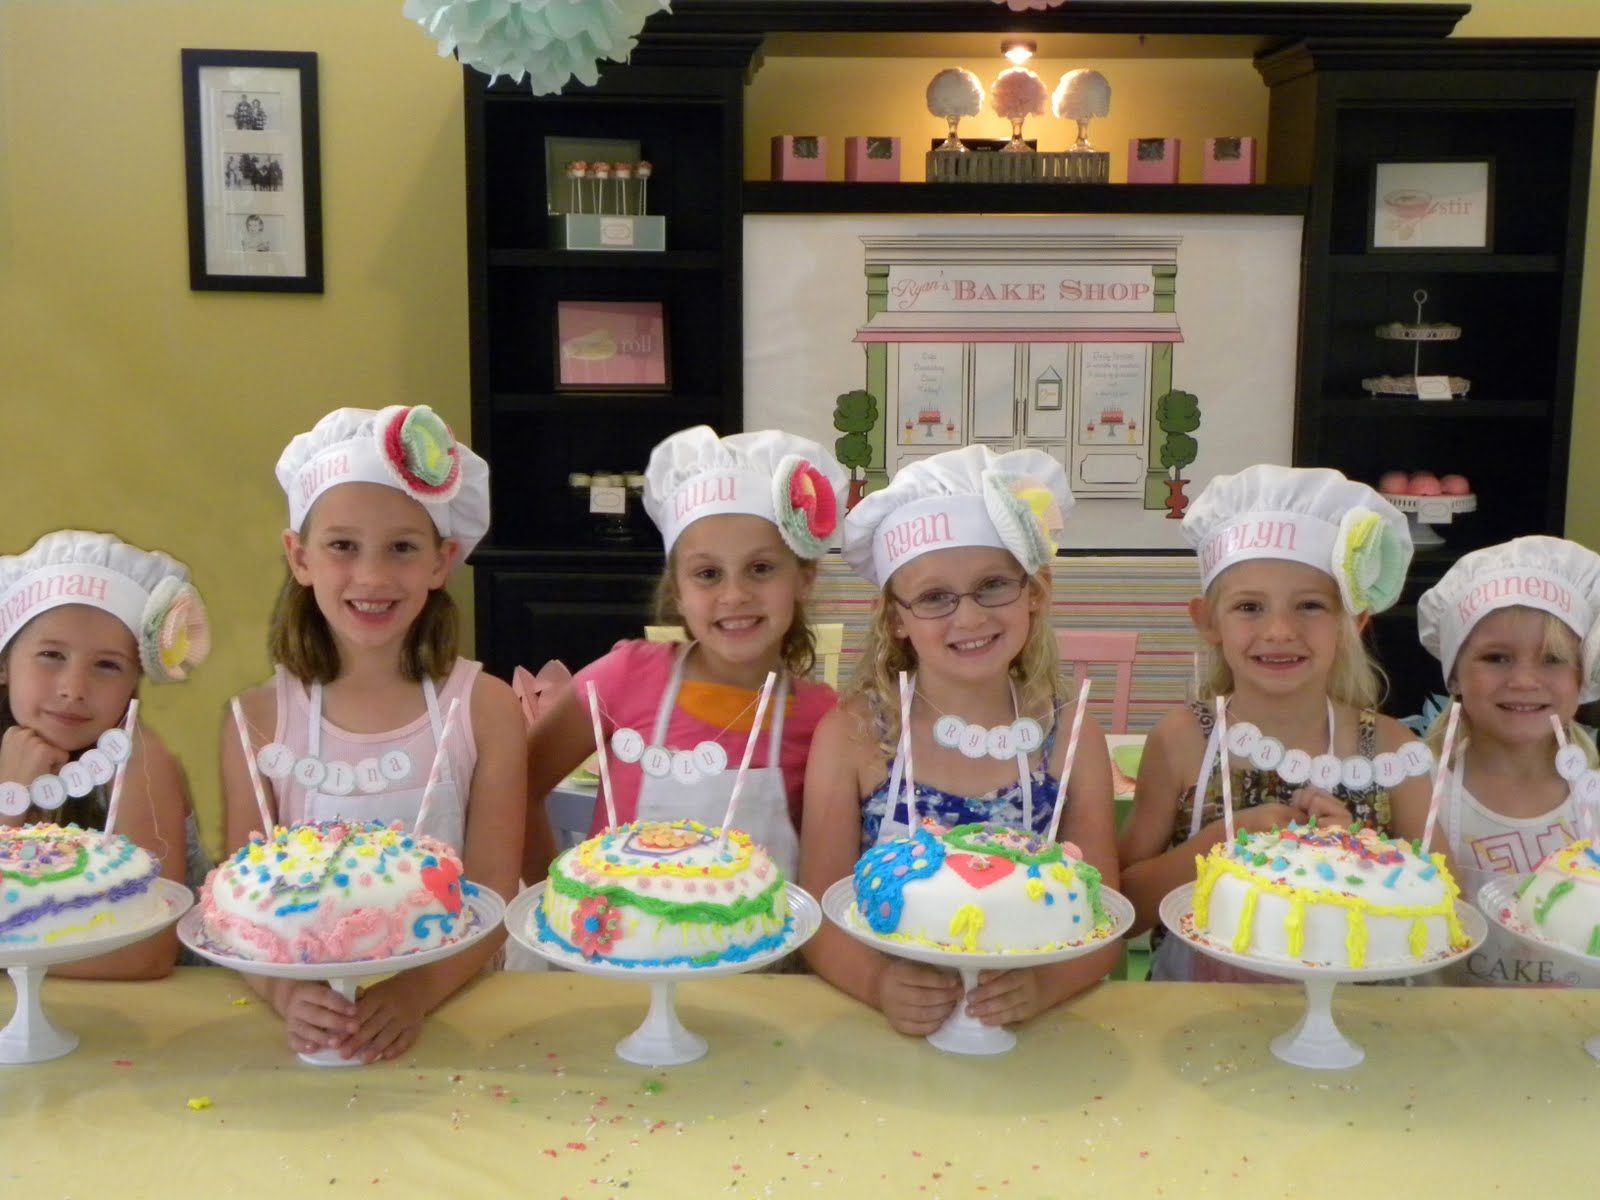 Cake Boss Birthday Party: Have a birthday party where each child gets to decorat